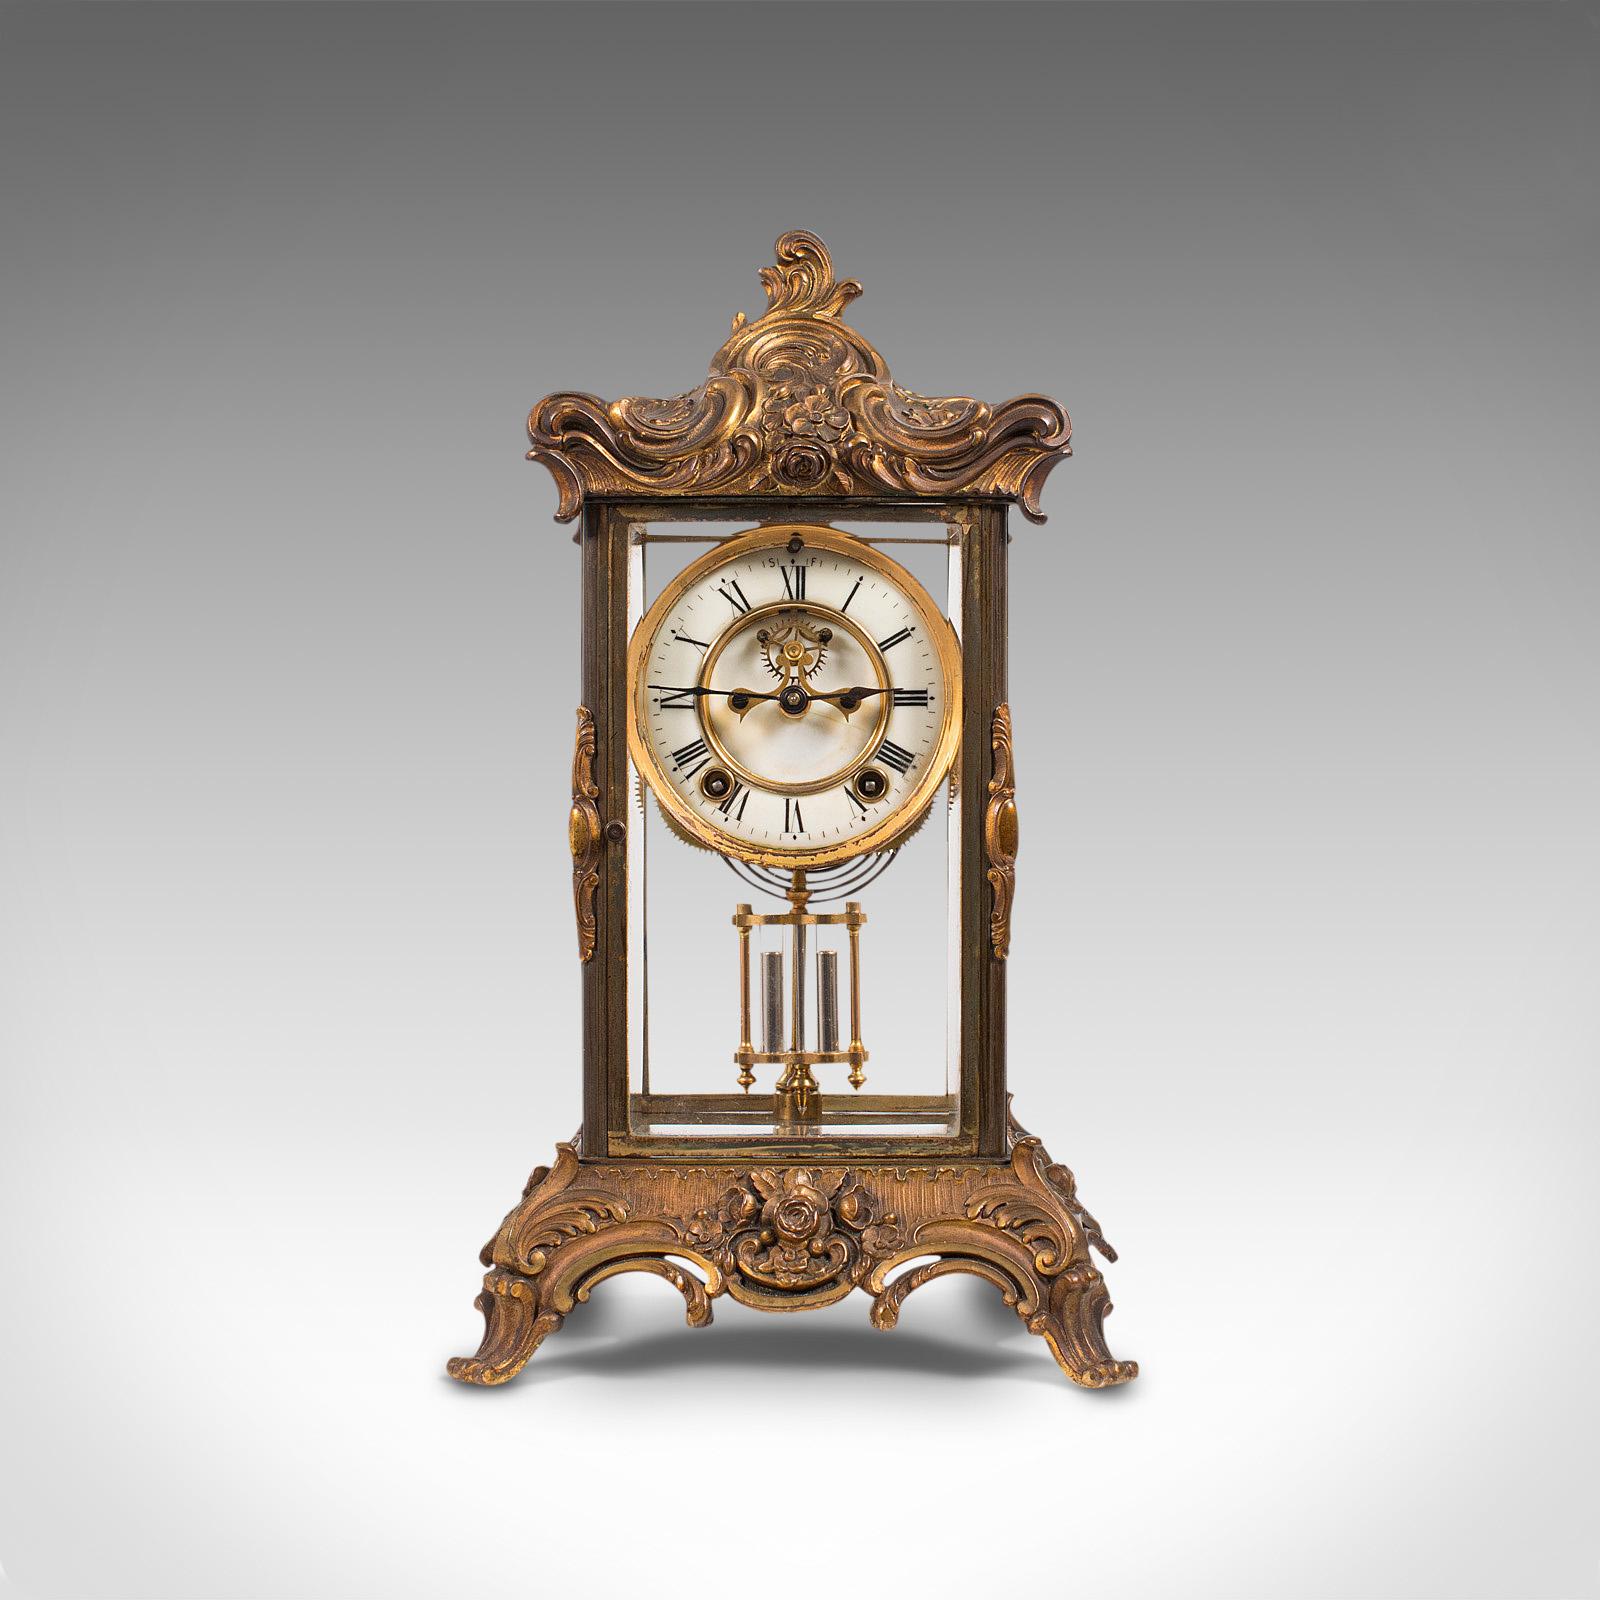 This is an antique mantel clock. A French, four glass, gilt bronze and ormolu decorated clock with visible Brocot escapement, dating to the late 19th century, circa 1900.

Superbly decorated timepiece for the mantel
Displaying a desirable aged